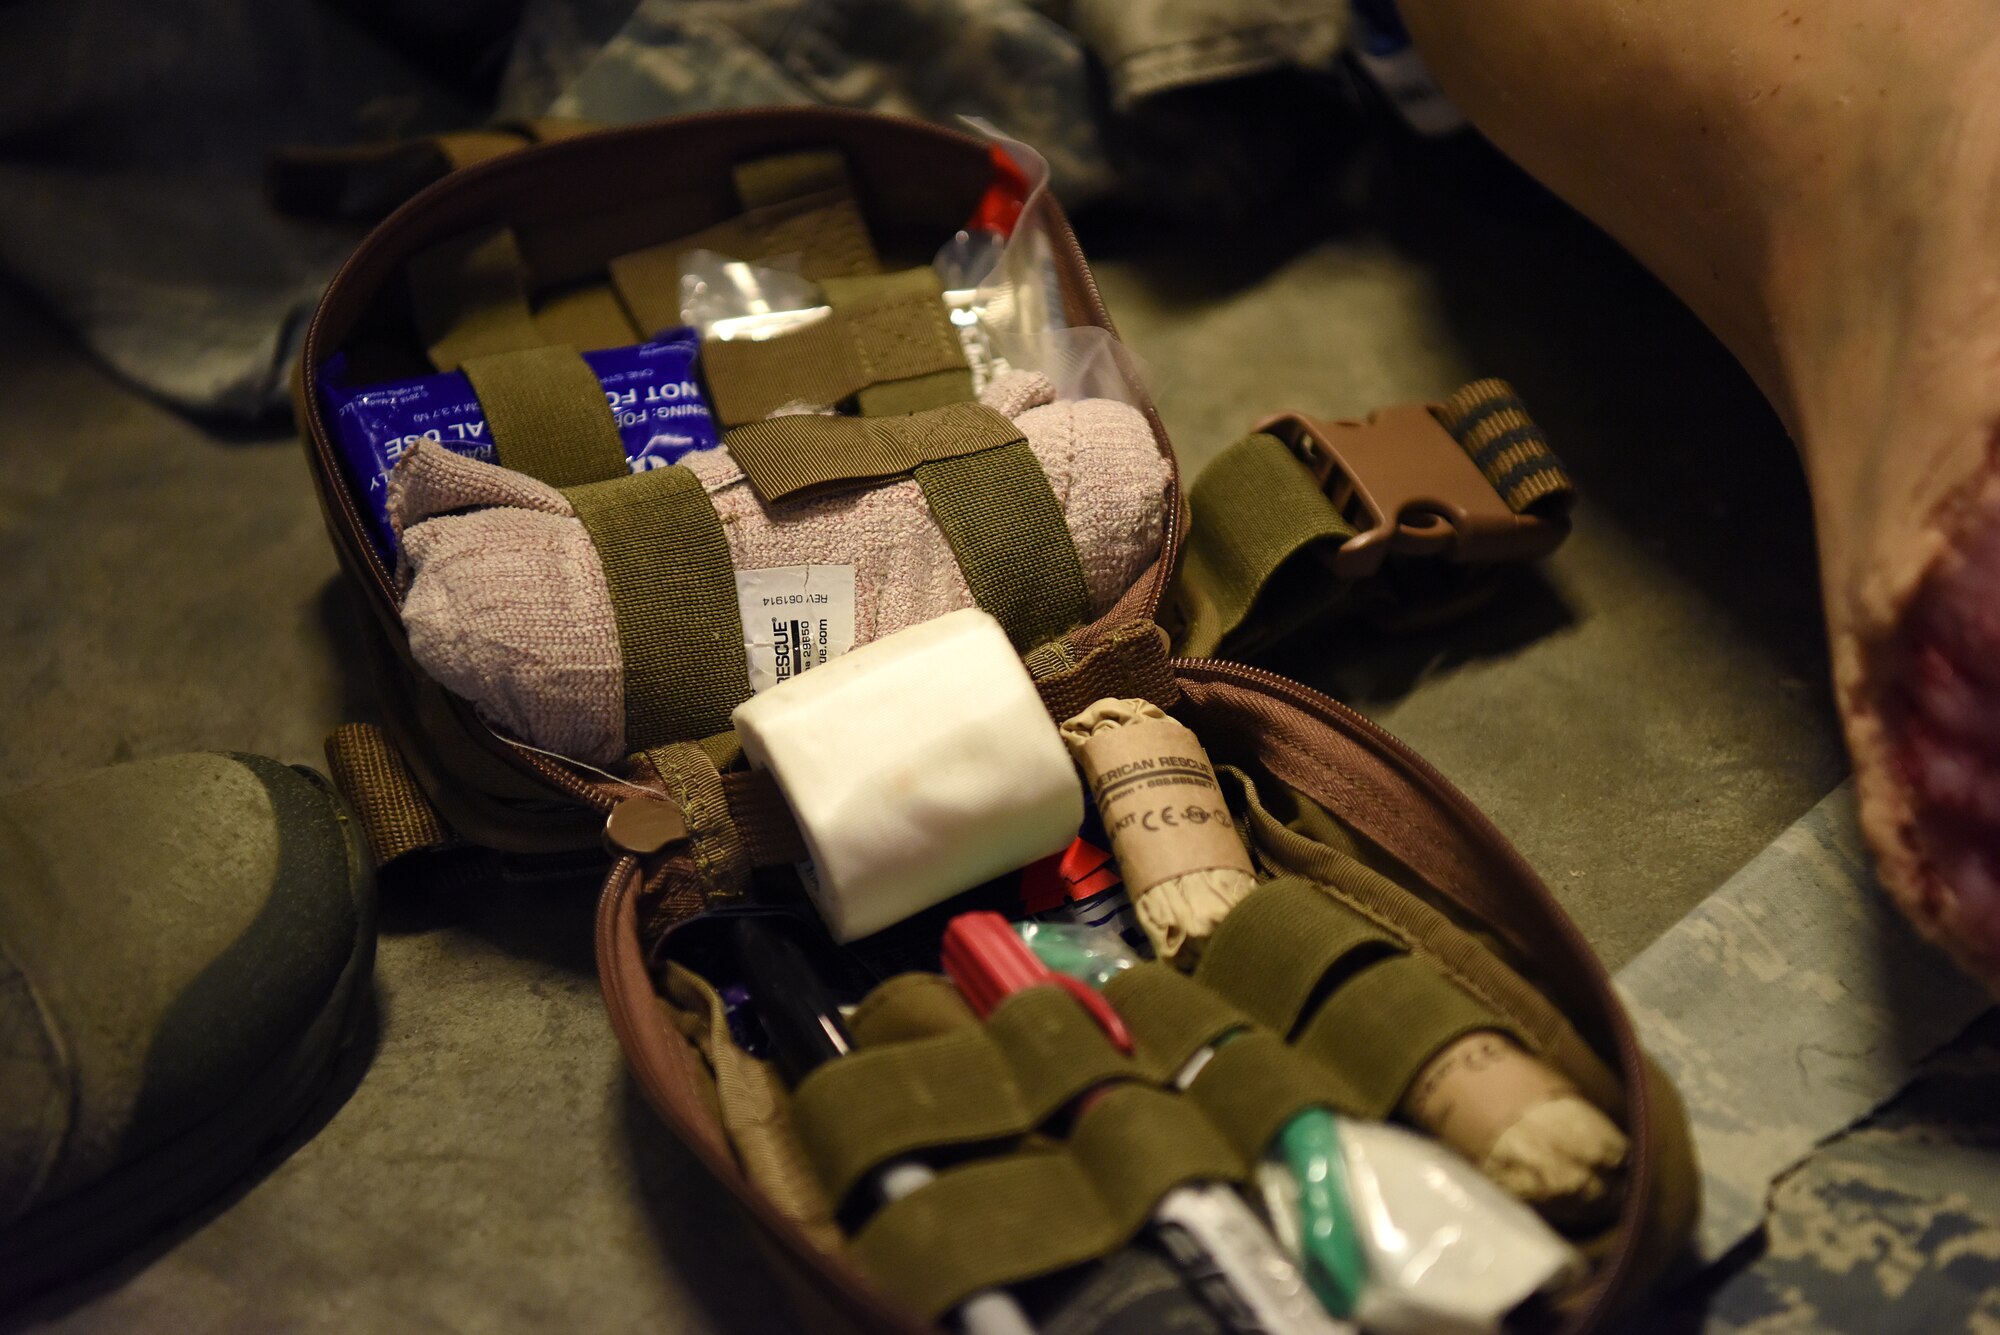 Medical equipment is displayed during the Tactical Combat Casualty Course inside Keesler Medical Center at Keesler Air Force Base, Mississippi, Feb. 19, 2020. The TCCC is replacing self-aid and buddy care to better prepare medics for deployed environments. (U.S. Air Force photo by Senior Airman Suzie Plotnikov)